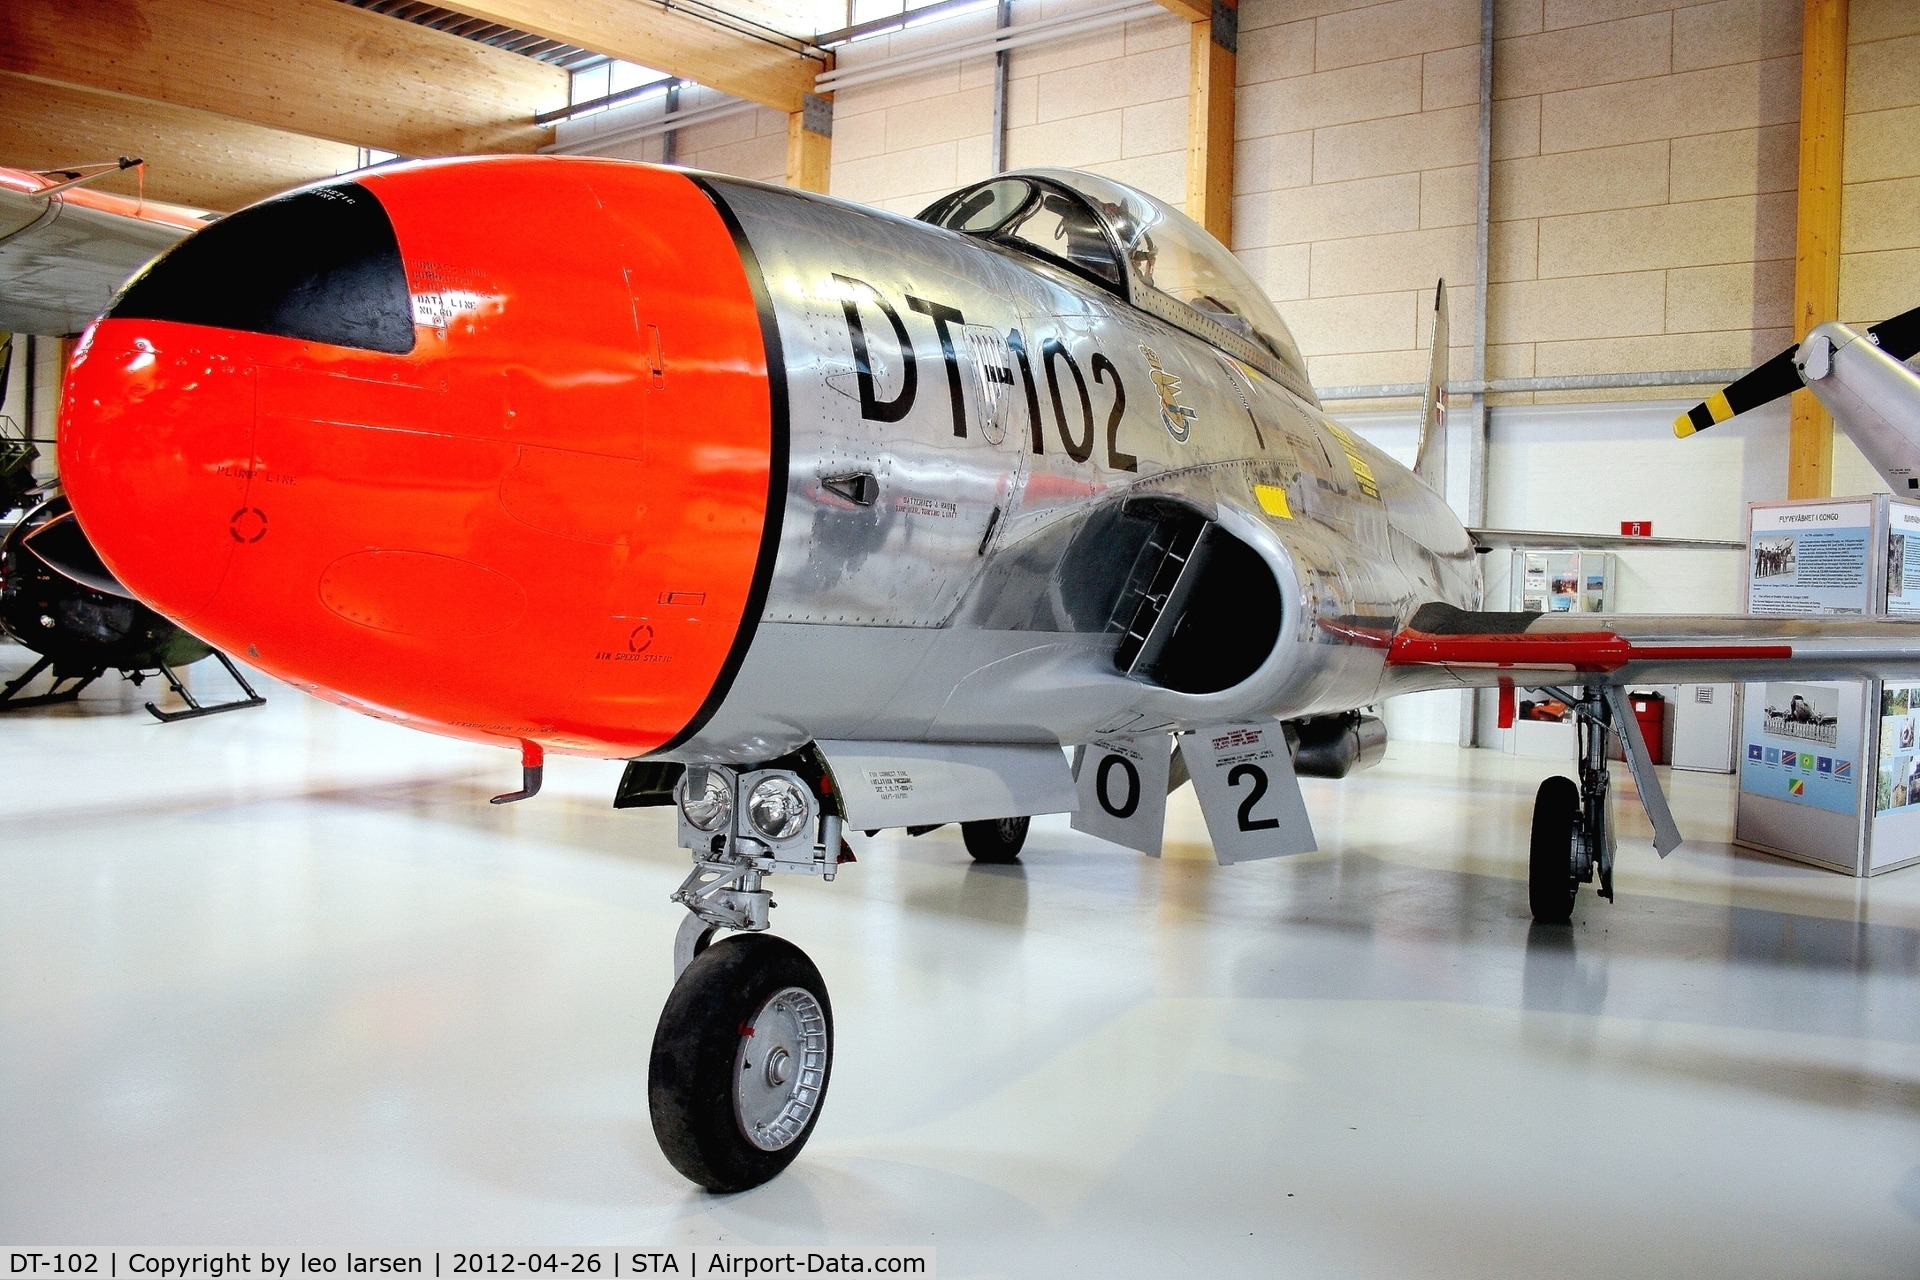 DT-102, 1951 Lockheed T-33A Shooting Star C/N 580-6886, Stauning 26.4.2012